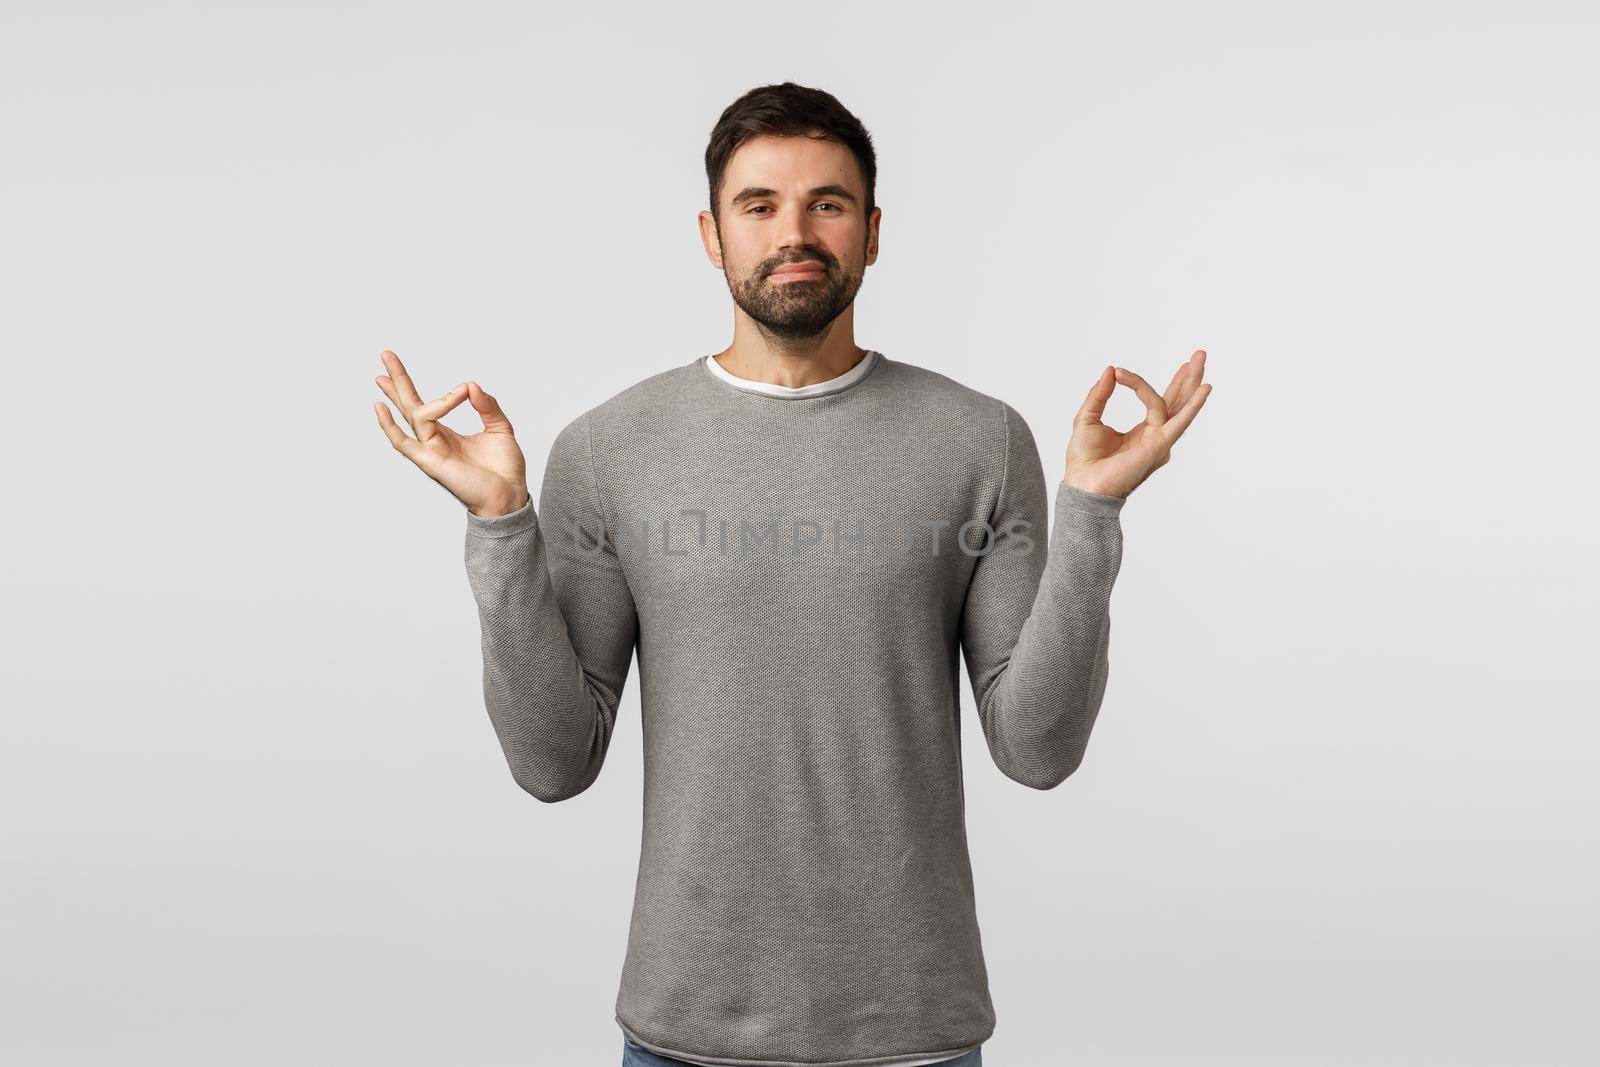 Peaceful and cheerful, smiling happy bearded male in grey sweater feeling okay after meditation, relief stress, hold hands sideways mudra, zen gesture, reach nirvana, practice yoga, white background.